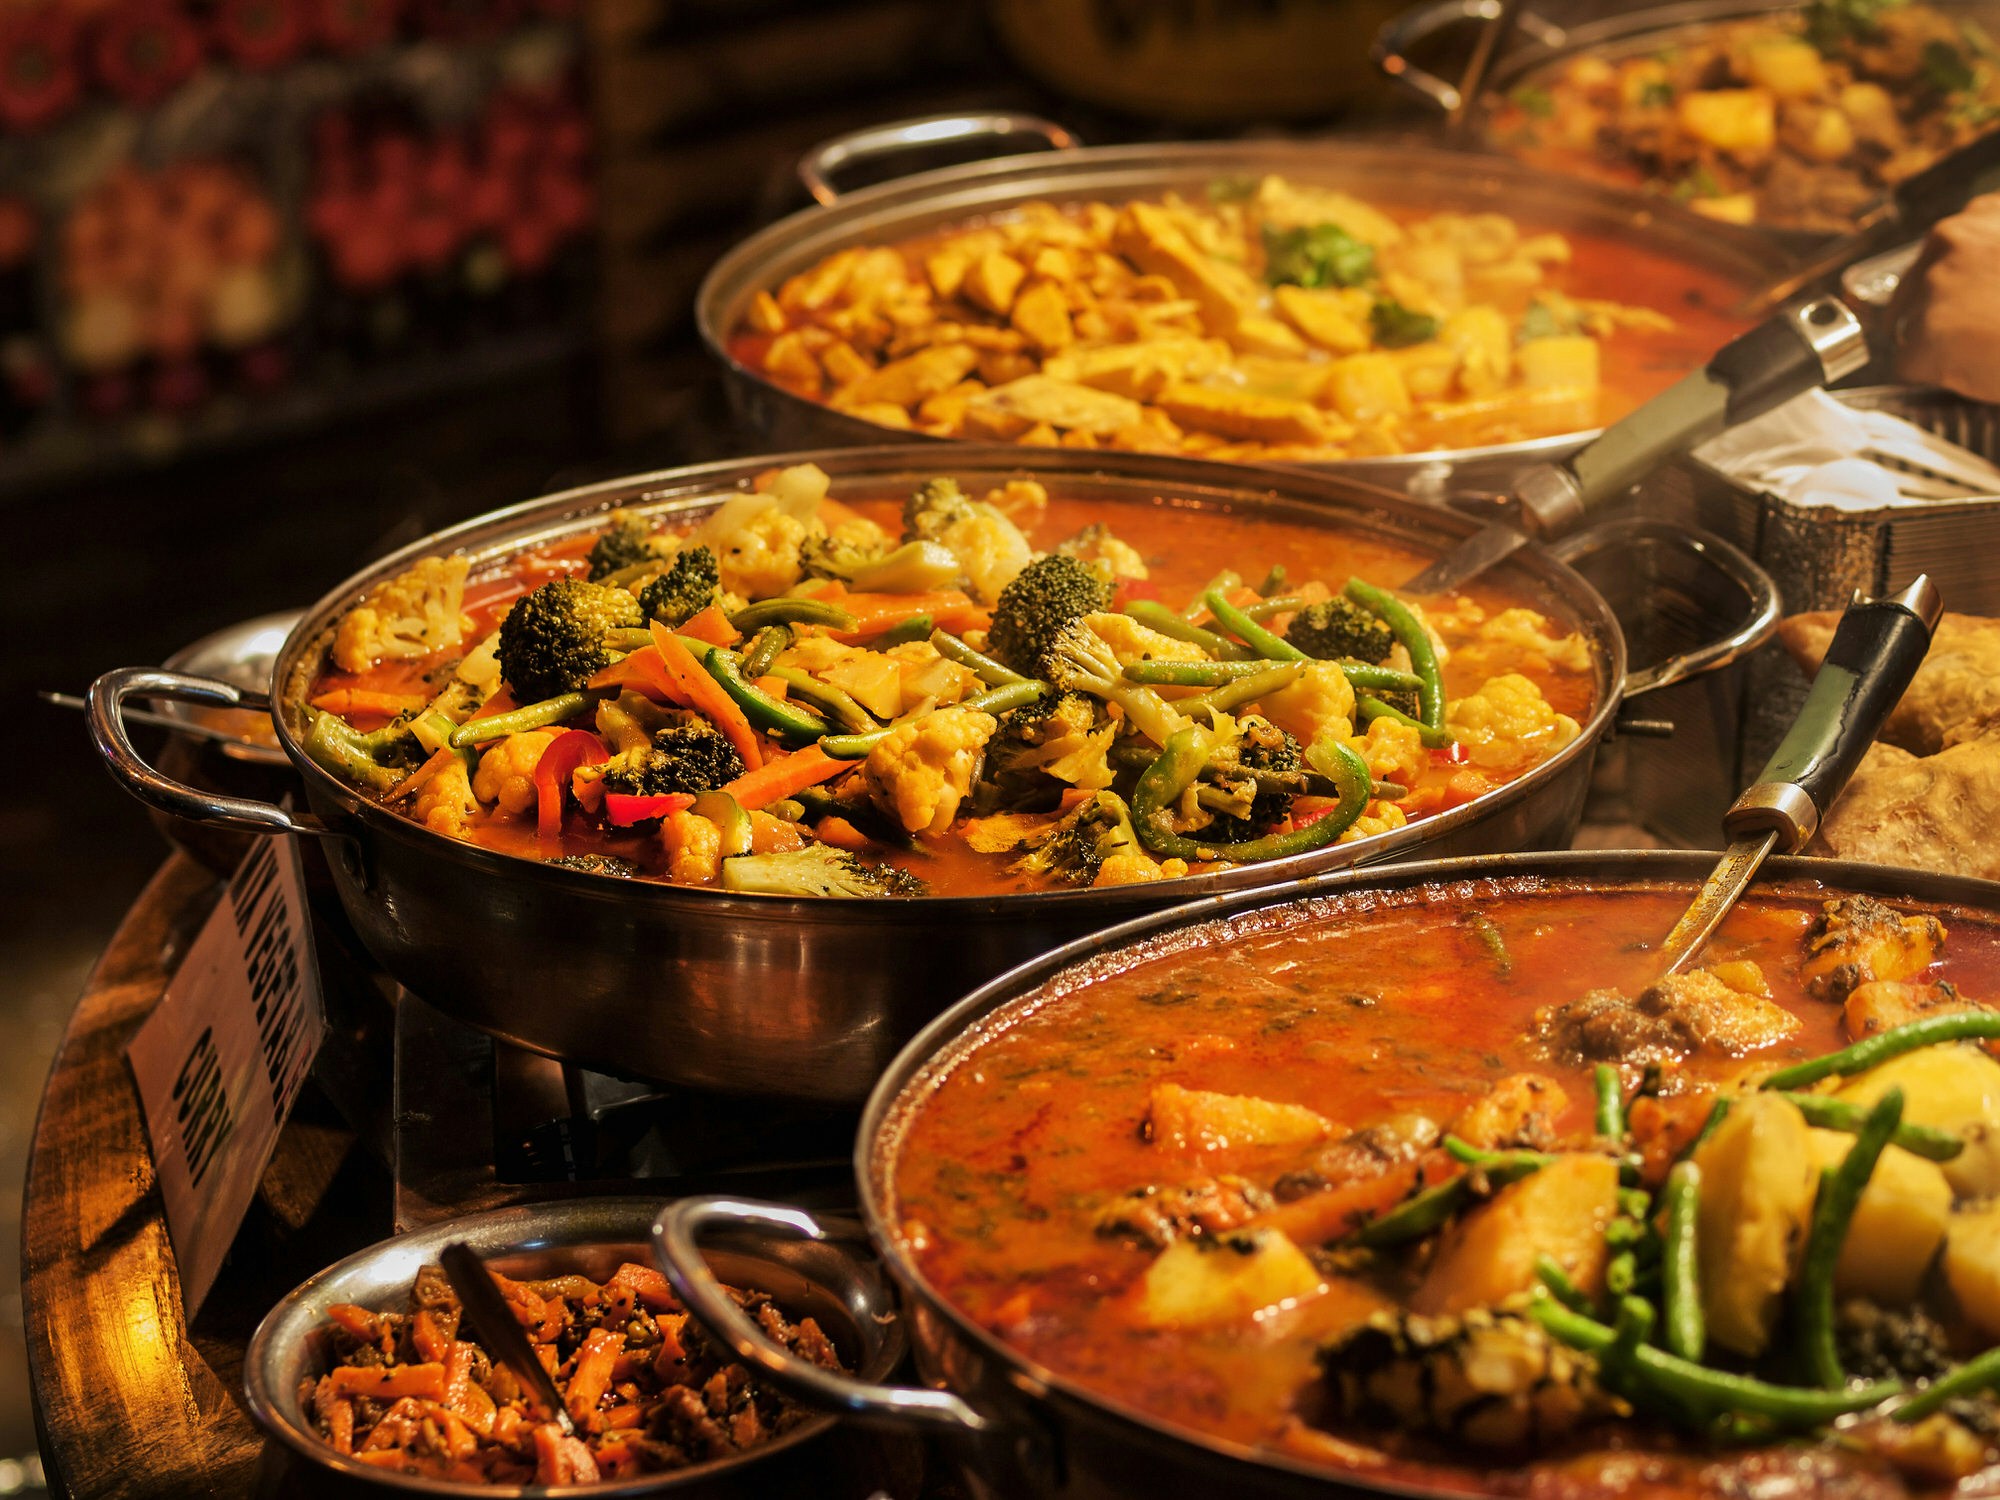 A selection of vegetable curries at an Indian takeaway in a London market